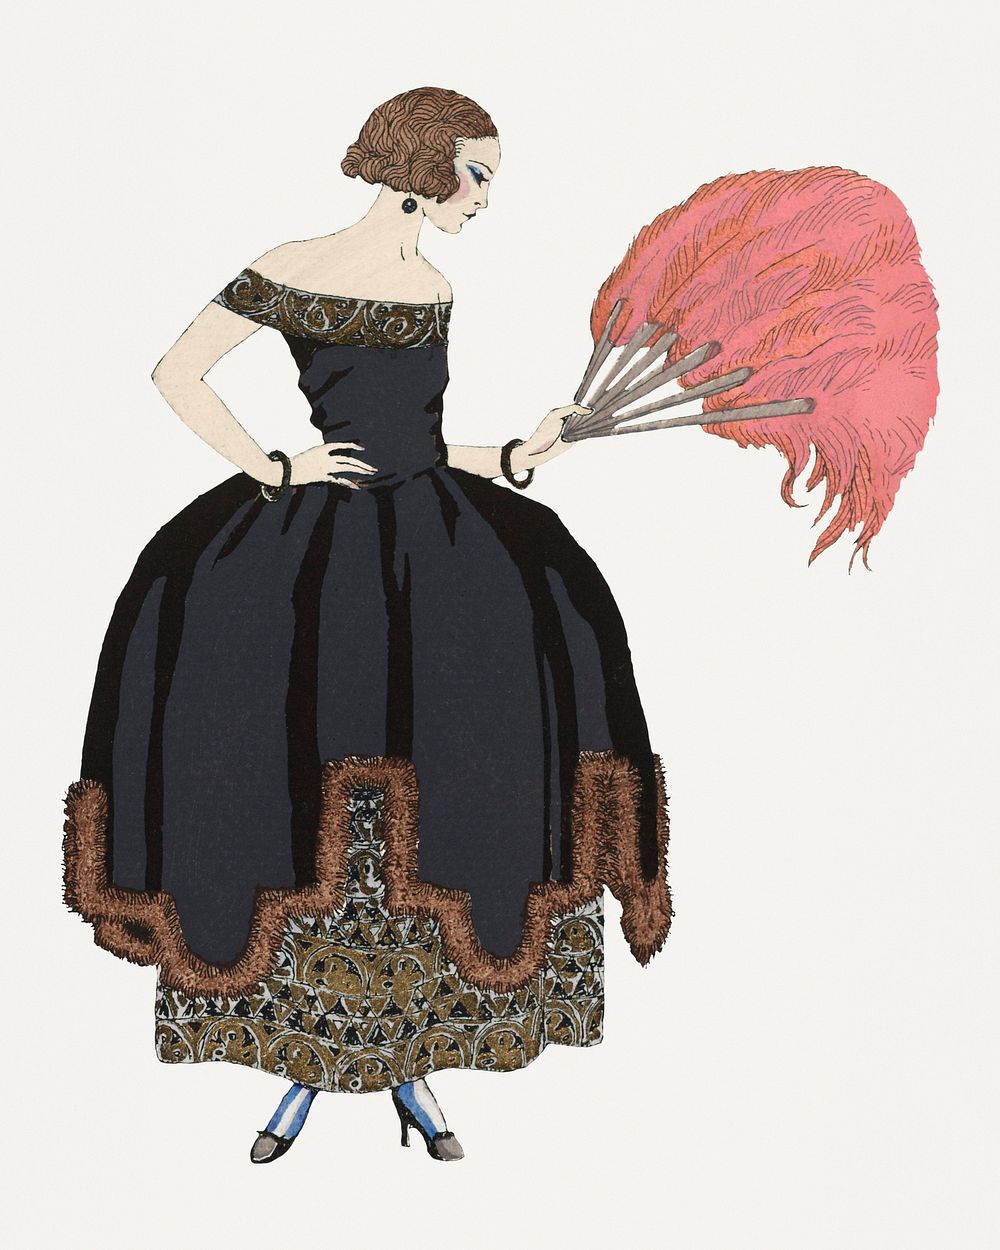 Black Victorian dress psd 19th century fashion, remix from artworks by George Barbier